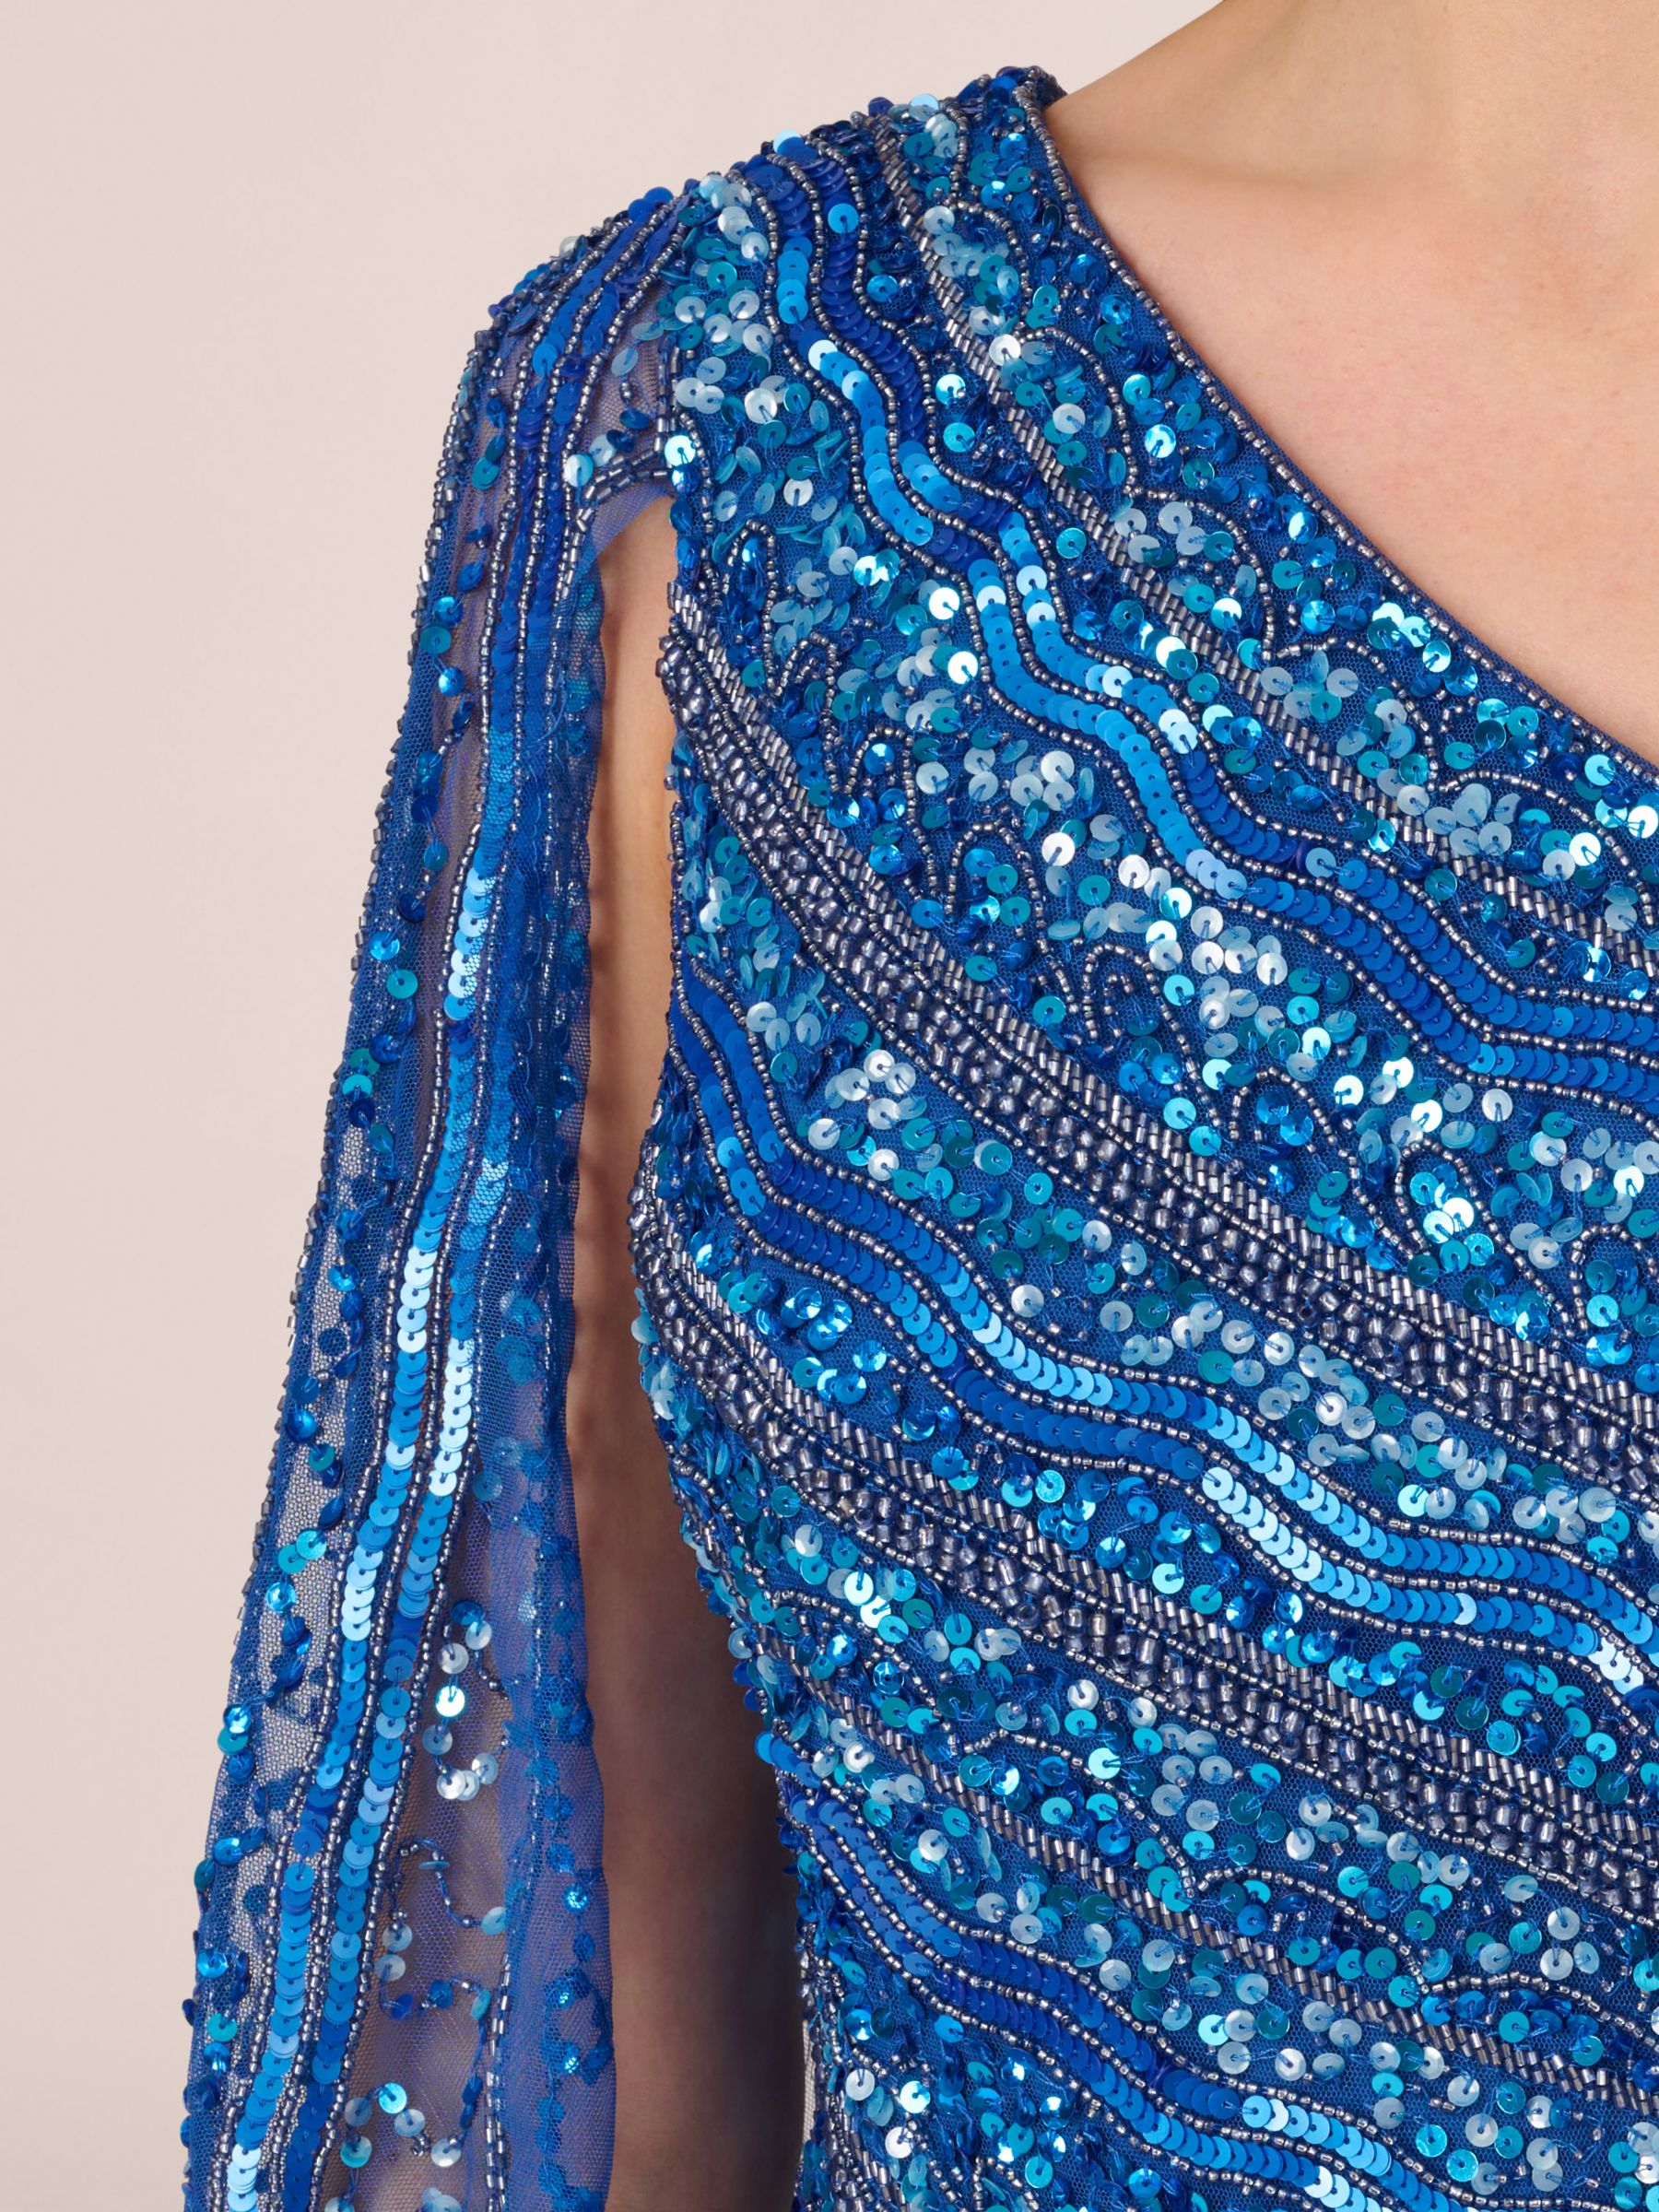 Buy Adrianna Papell One Shoulder Beaded Maxi Dress, Blue Horizon Online at johnlewis.com